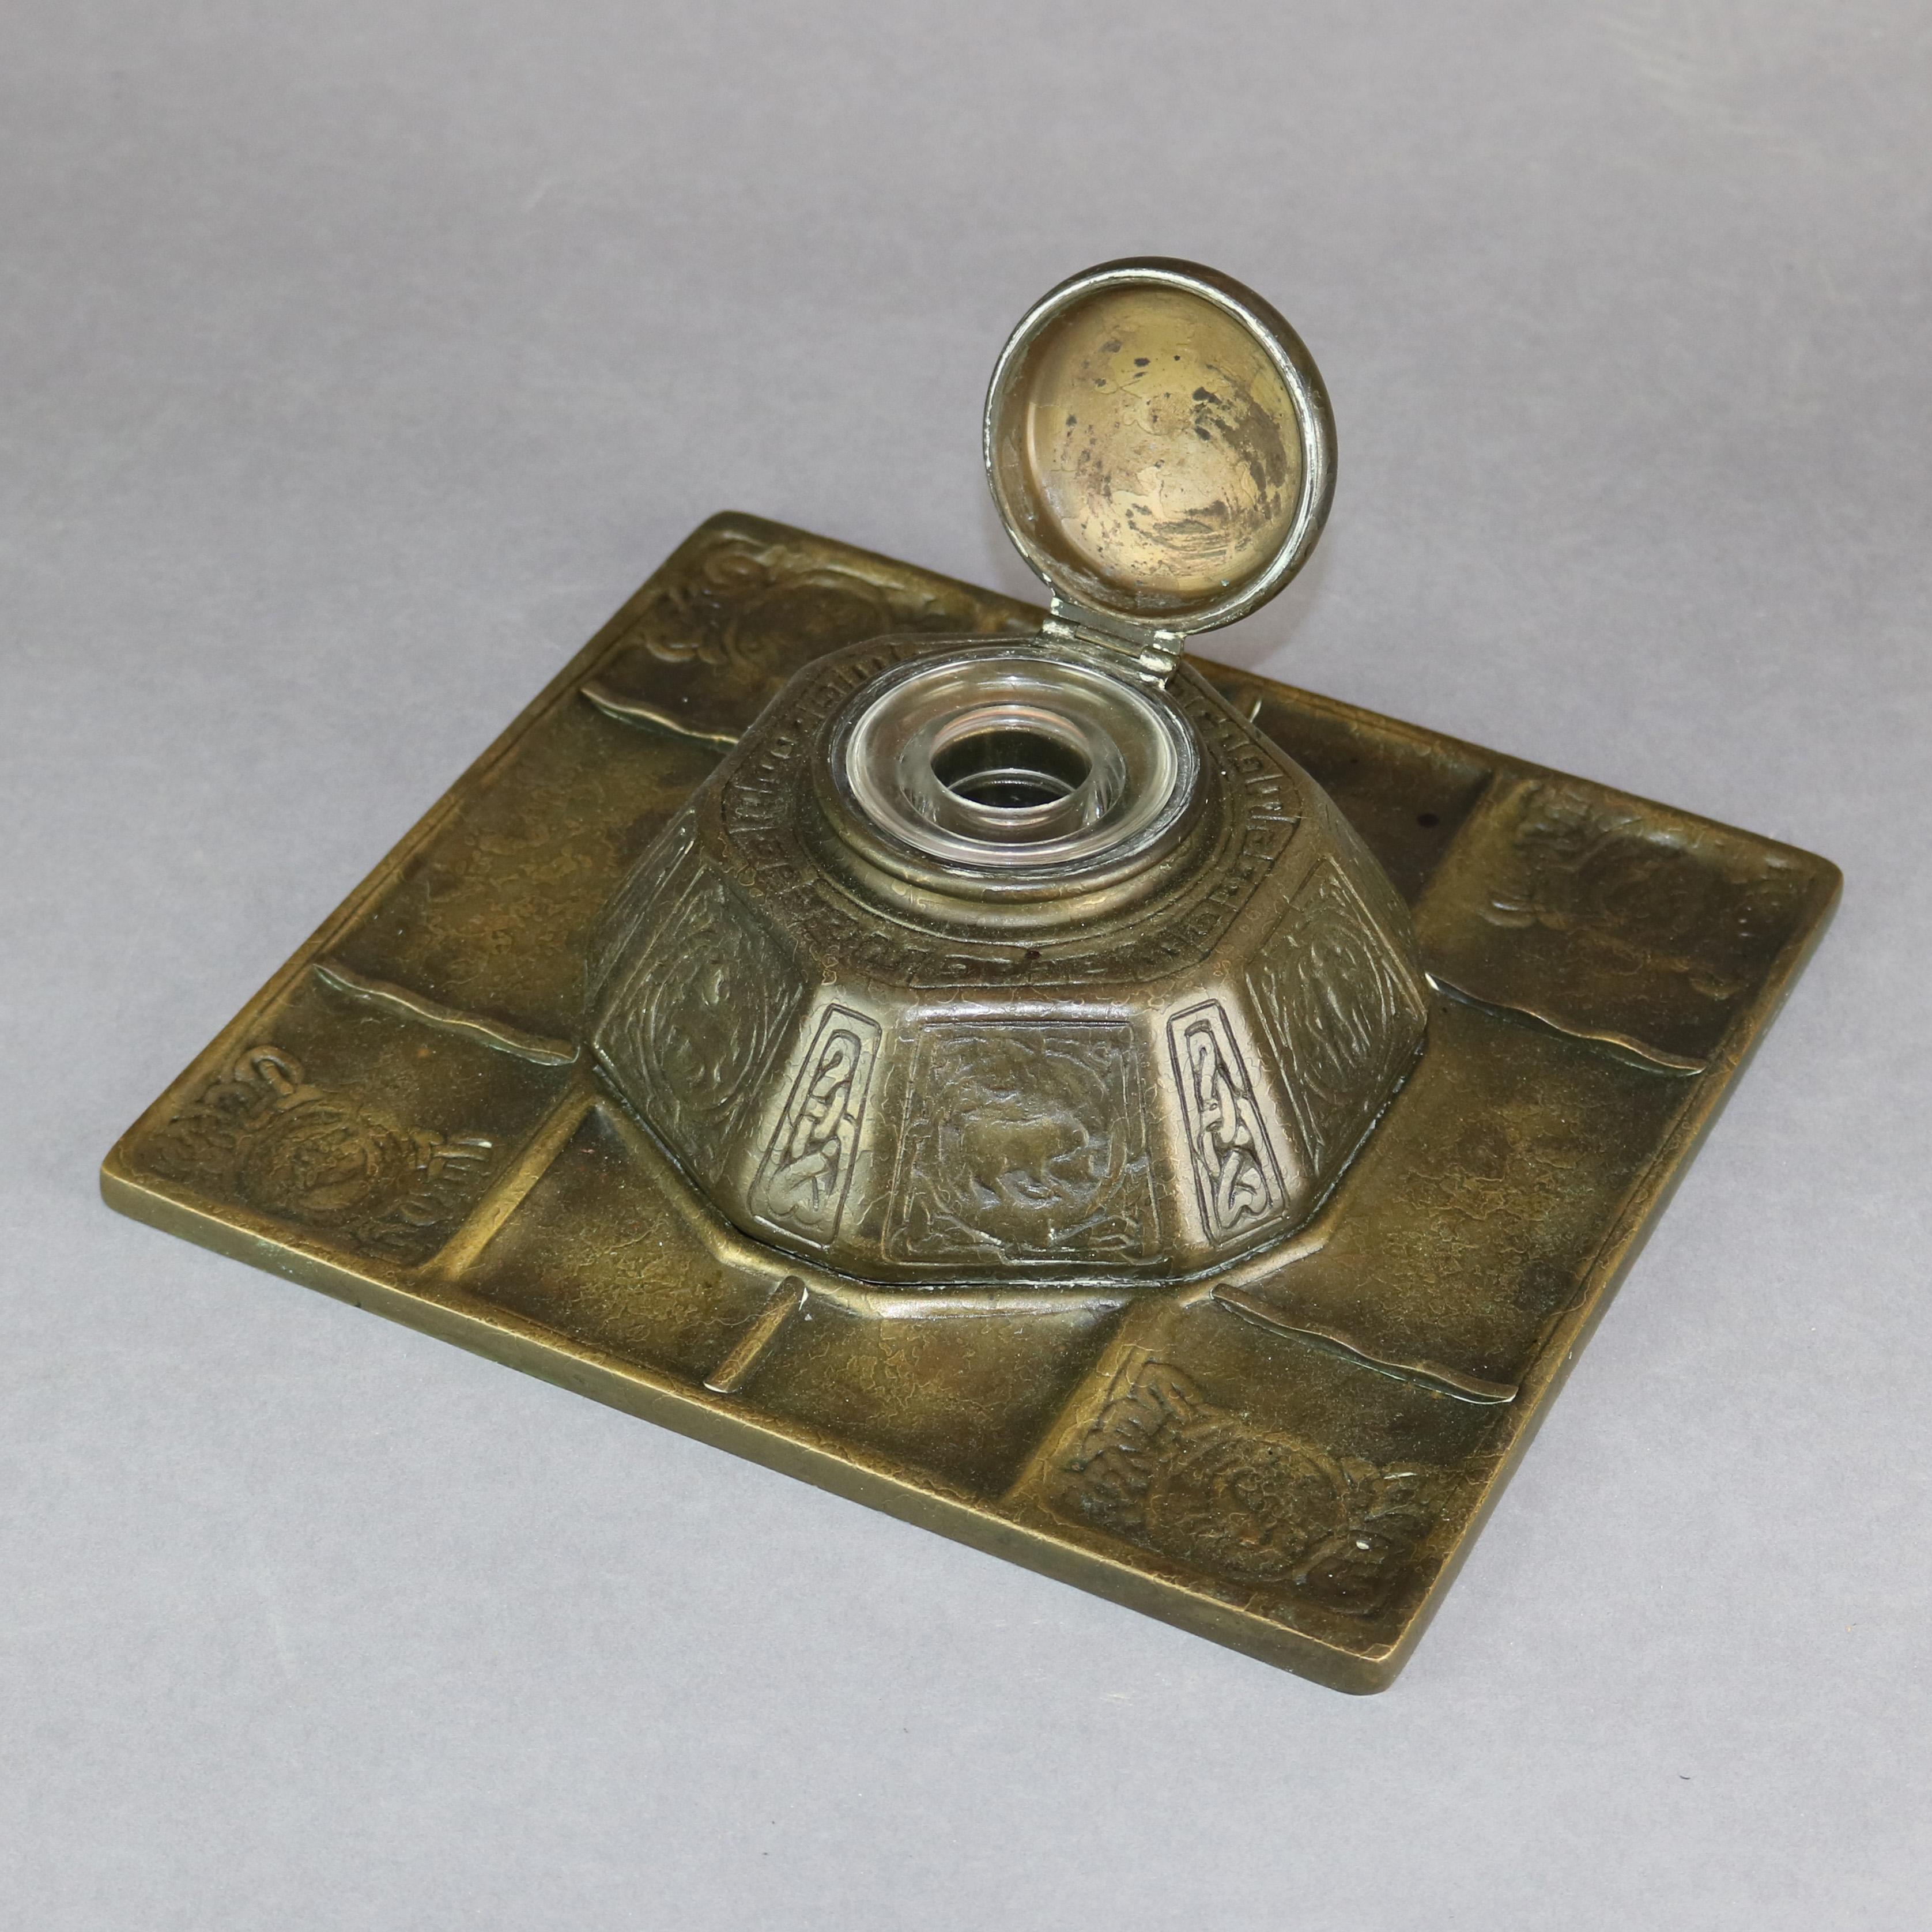 An antique inkwell by Tiffany Studios offers cast bronze form in pyramidal form having alternating panels of Zodiac signs and stylized interlocking chains and seated on segmented tray base, lid opens to glass ink vessel, signed 